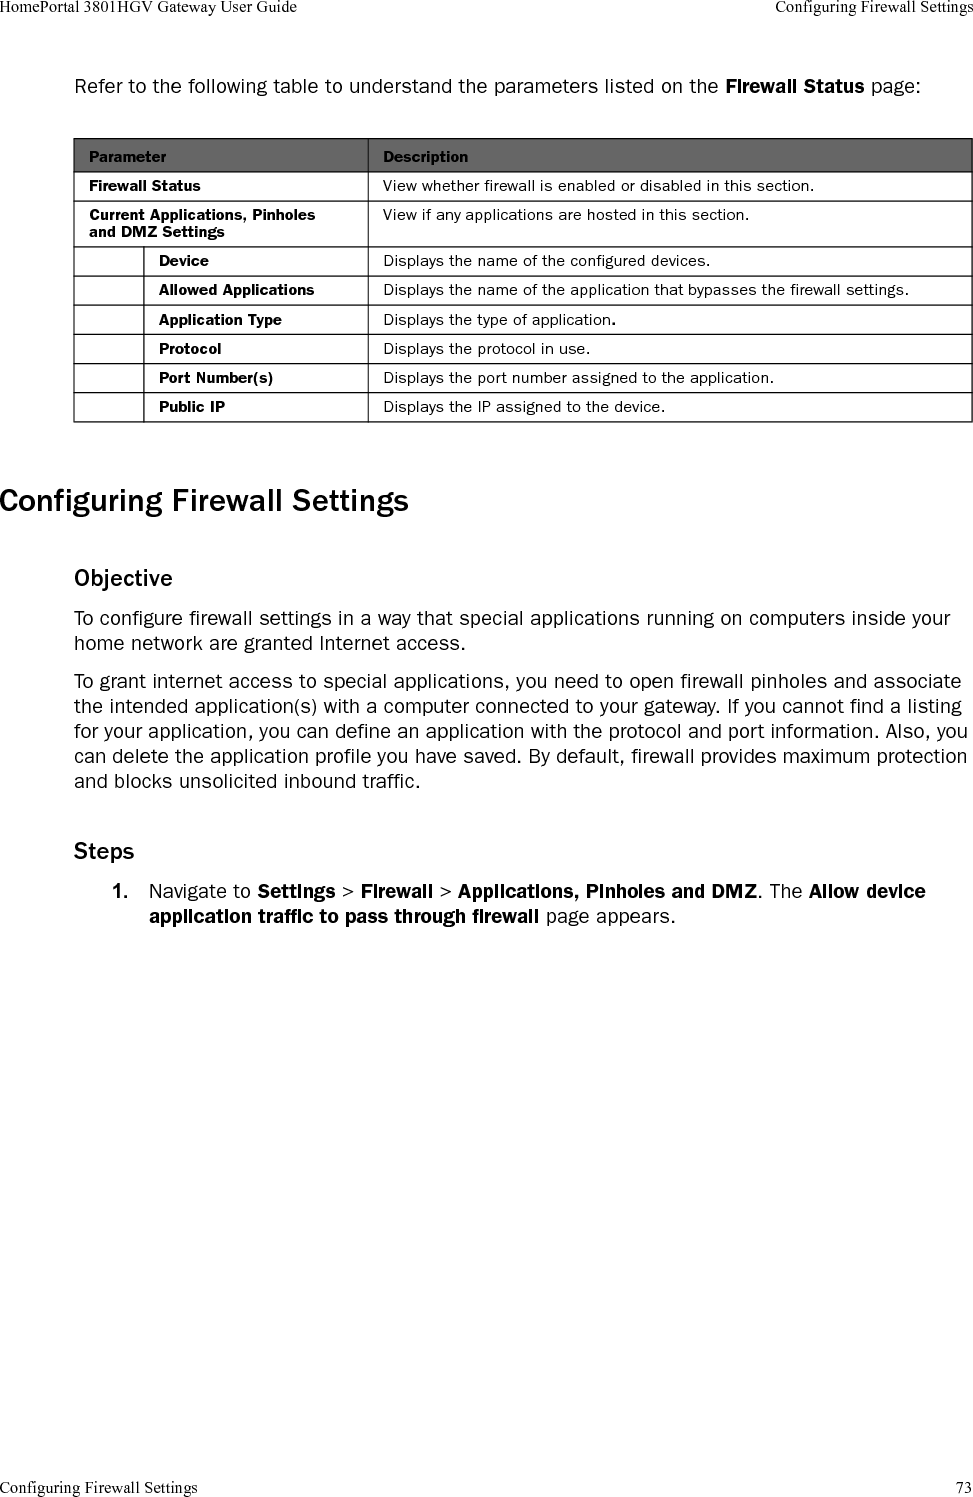 Configuring Firewall Settings 73HomePortal 3801HGV Gateway User Guide Configuring Firewall SettingsRefer to the following table to understand the parameters listed on the Firewall Status page:Configuring Firewall SettingsObjectiveTo configure firewall settings in a way that special applications running on computers inside your home network are granted Internet access. To grant internet access to special applications, you need to open firewall pinholes and associate the intended application(s) with a computer connected to your gateway. If you cannot find a listing for your application, you can define an application with the protocol and port information. Also, you can delete the application profile you have saved. By default, firewall provides maximum protection and blocks unsolicited inbound traffic.Steps1. Navigate to Settings &gt; Firewall &gt; Applications, Pinholes and DMZ. The Allow device application traffic to pass through firewall page appears.Parameter DescriptionFirewall Status View whether firewall is enabled or disabled in this section.Current Applications, Pinholes and DMZ SettingsView if any applications are hosted in this section.Device Displays the name of the configured devices.Allowed Applications Displays the name of the application that bypasses the firewall settings.Application Type Displays the type of application.Protocol Displays the protocol in use.Port Number(s) Displays the port number assigned to the application.Public IP Displays the IP assigned to the device.